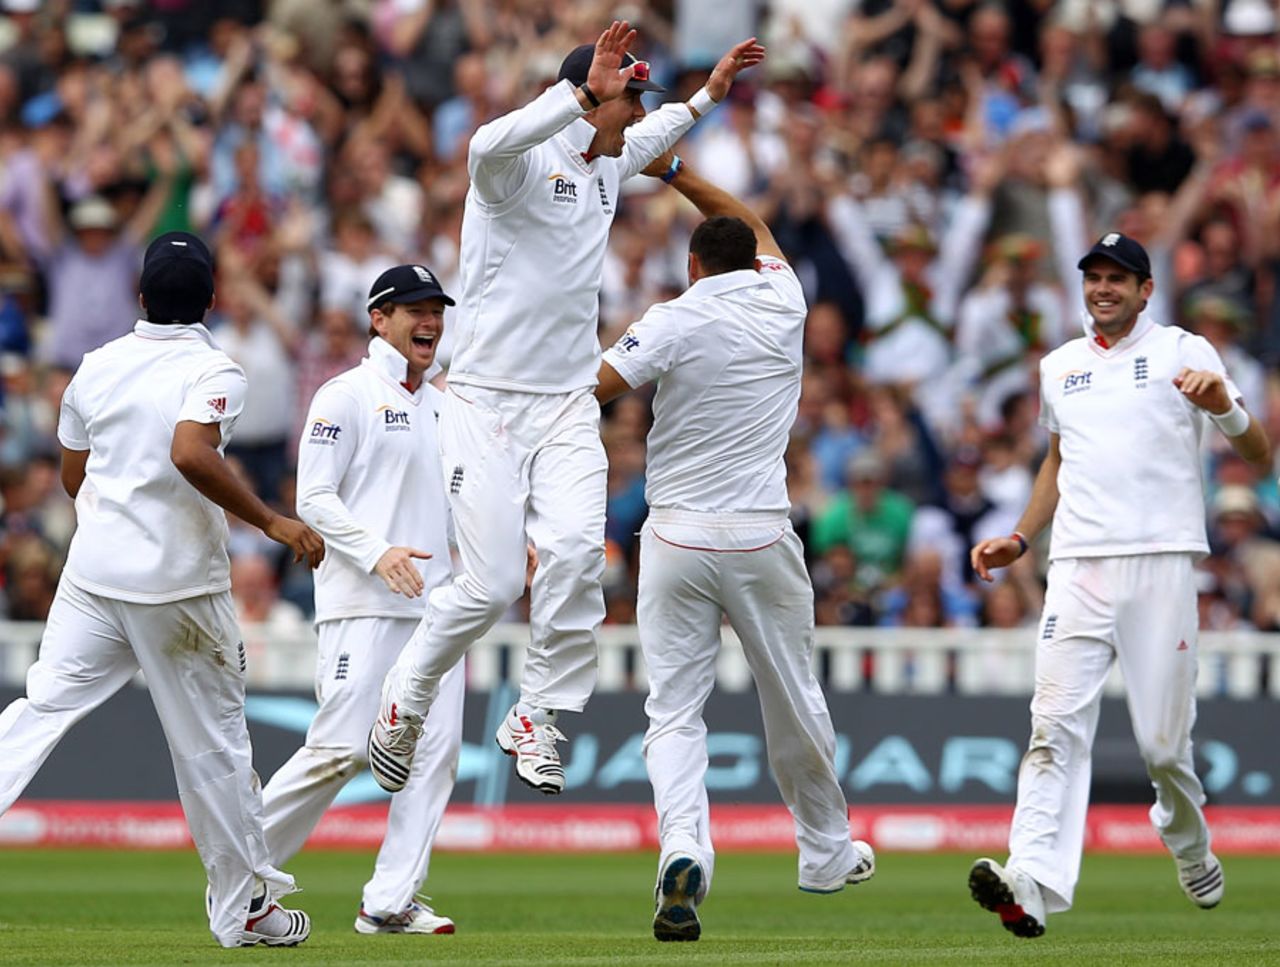 England celebrate their innings-and-242-run win, England v India, 3rd Test, Edgbaston, 4th day, August 13, 2011